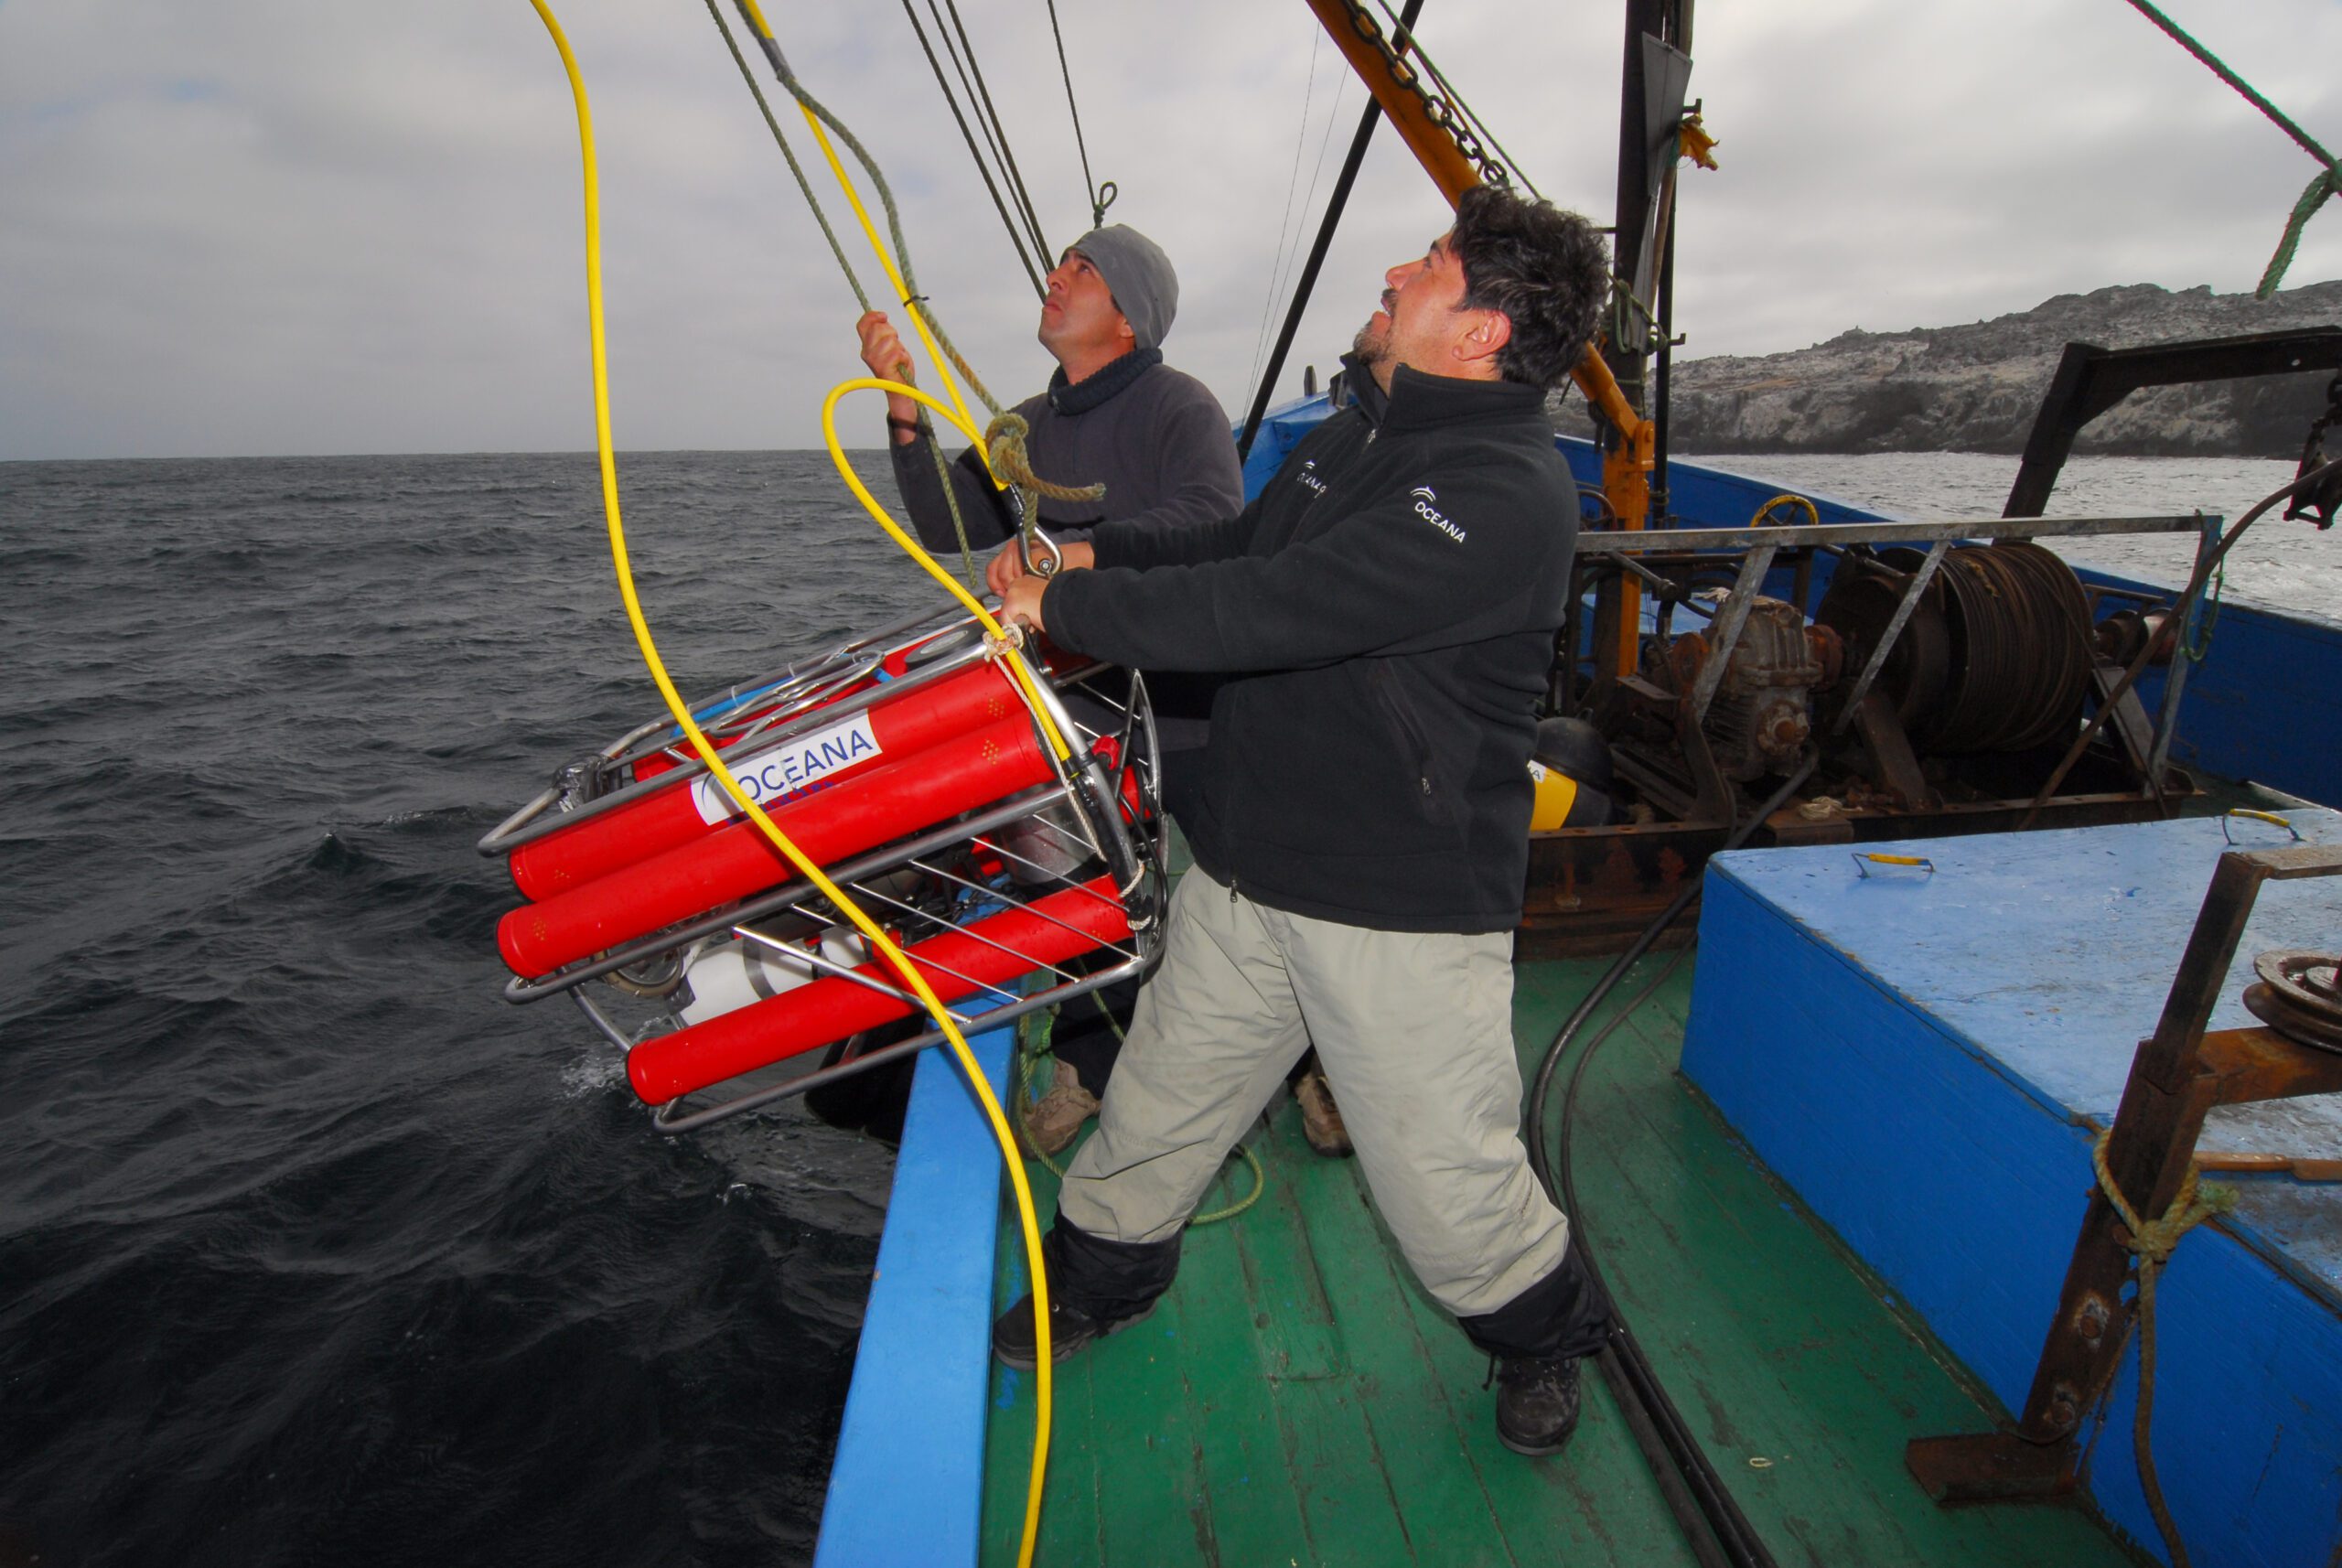 Two researchers lower a remotely operated vehicle into the Chilean ocean from a boat